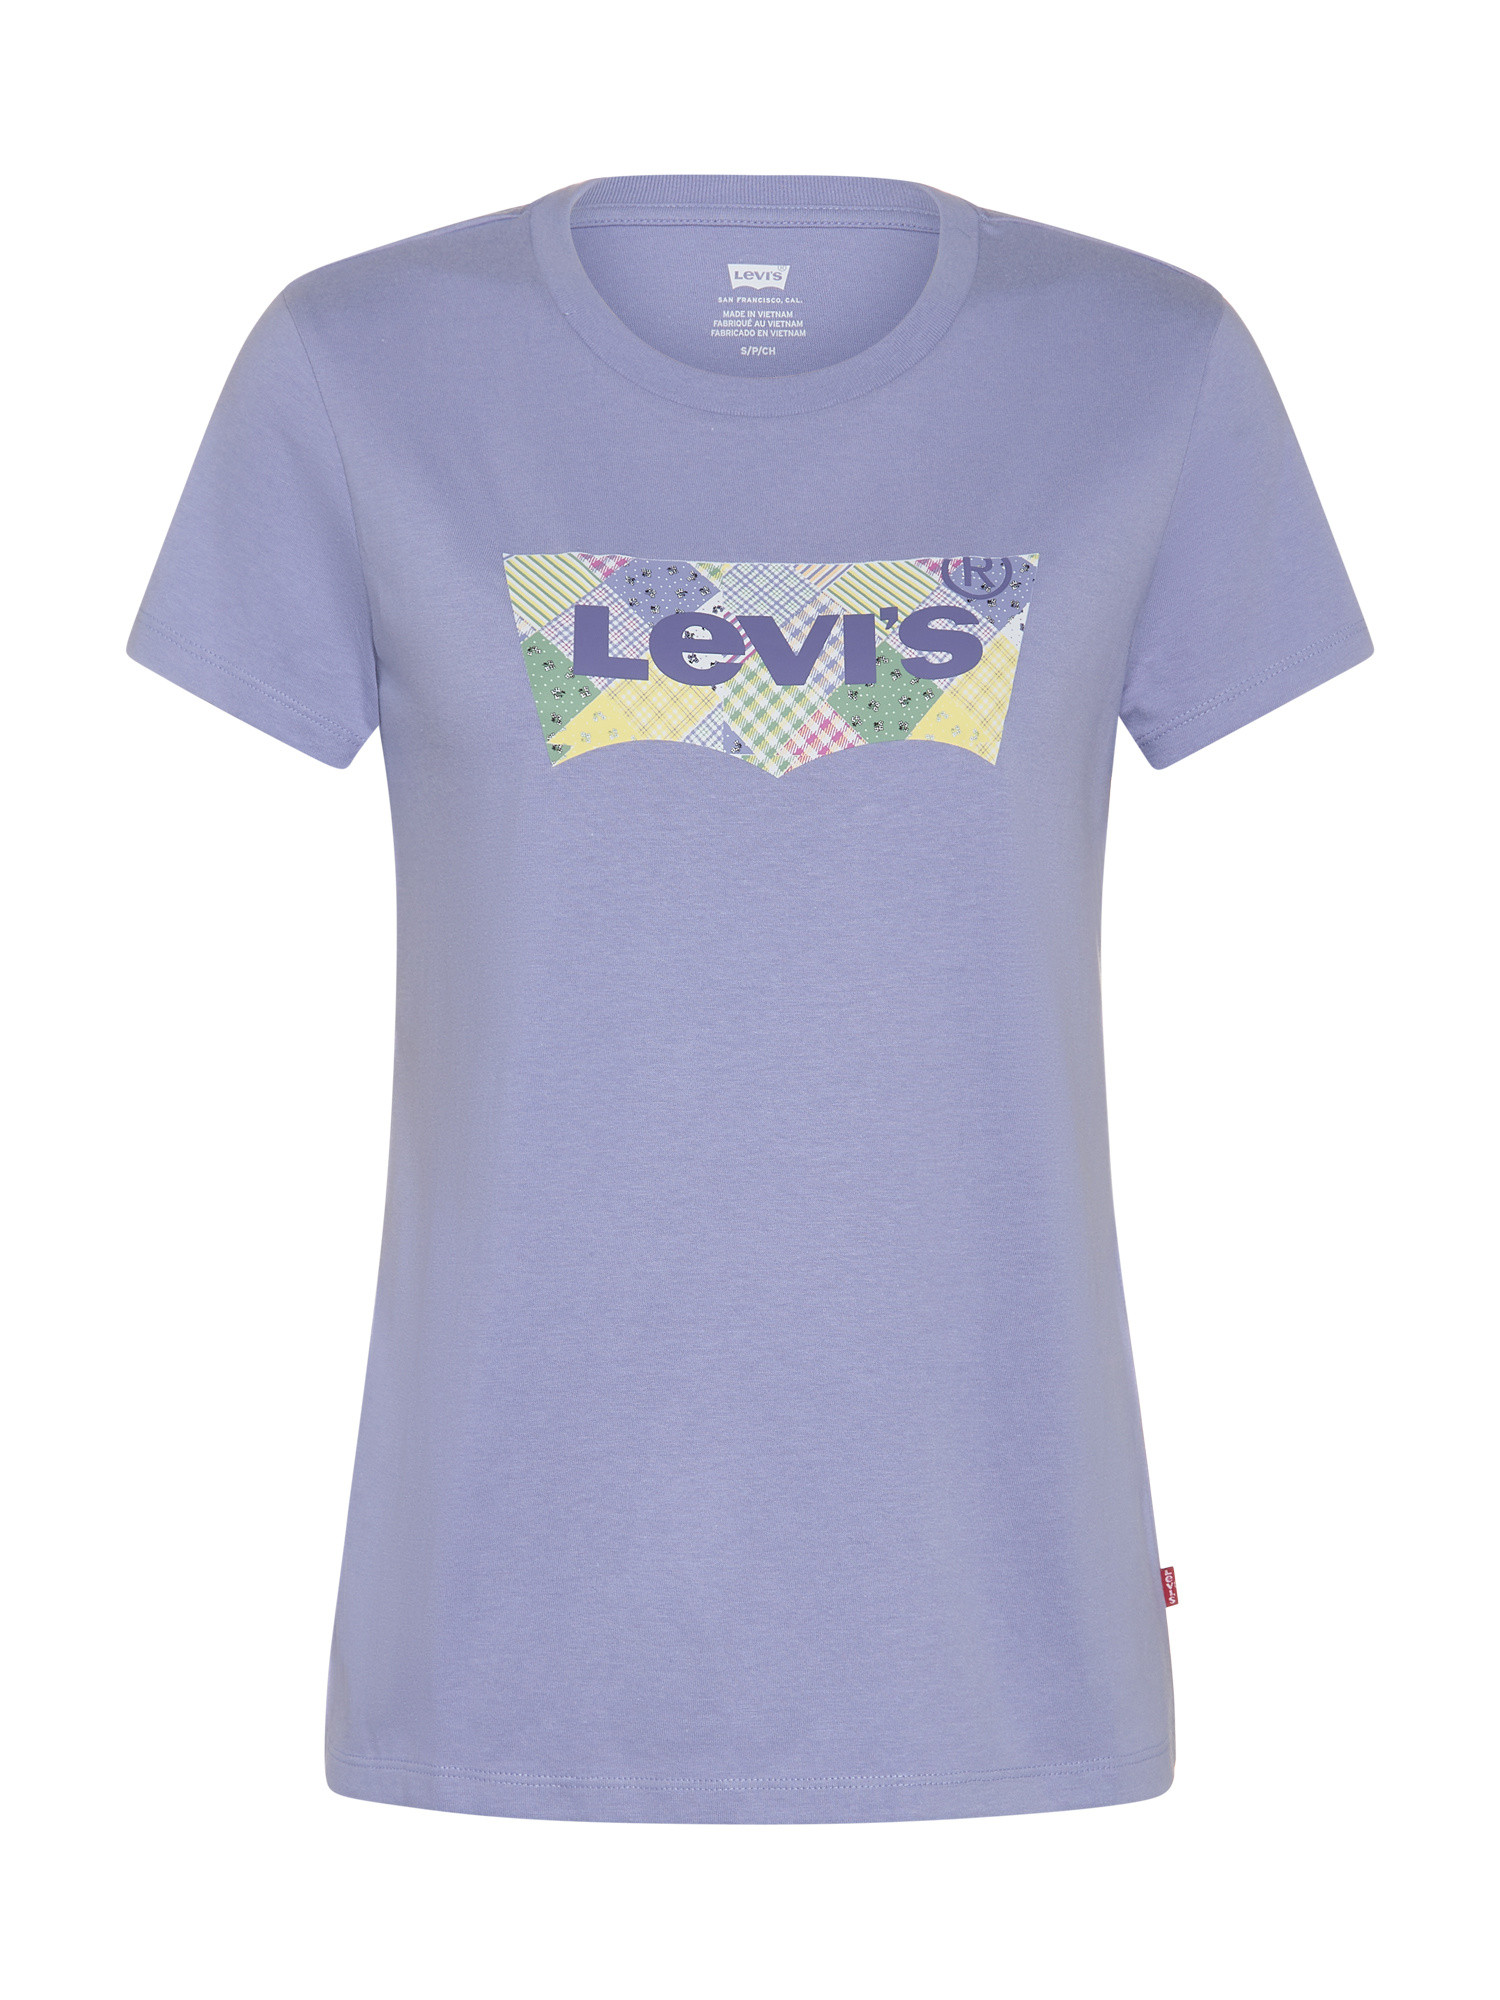 Levi's - T-shirt in cotone con logo, Viola, large image number 0